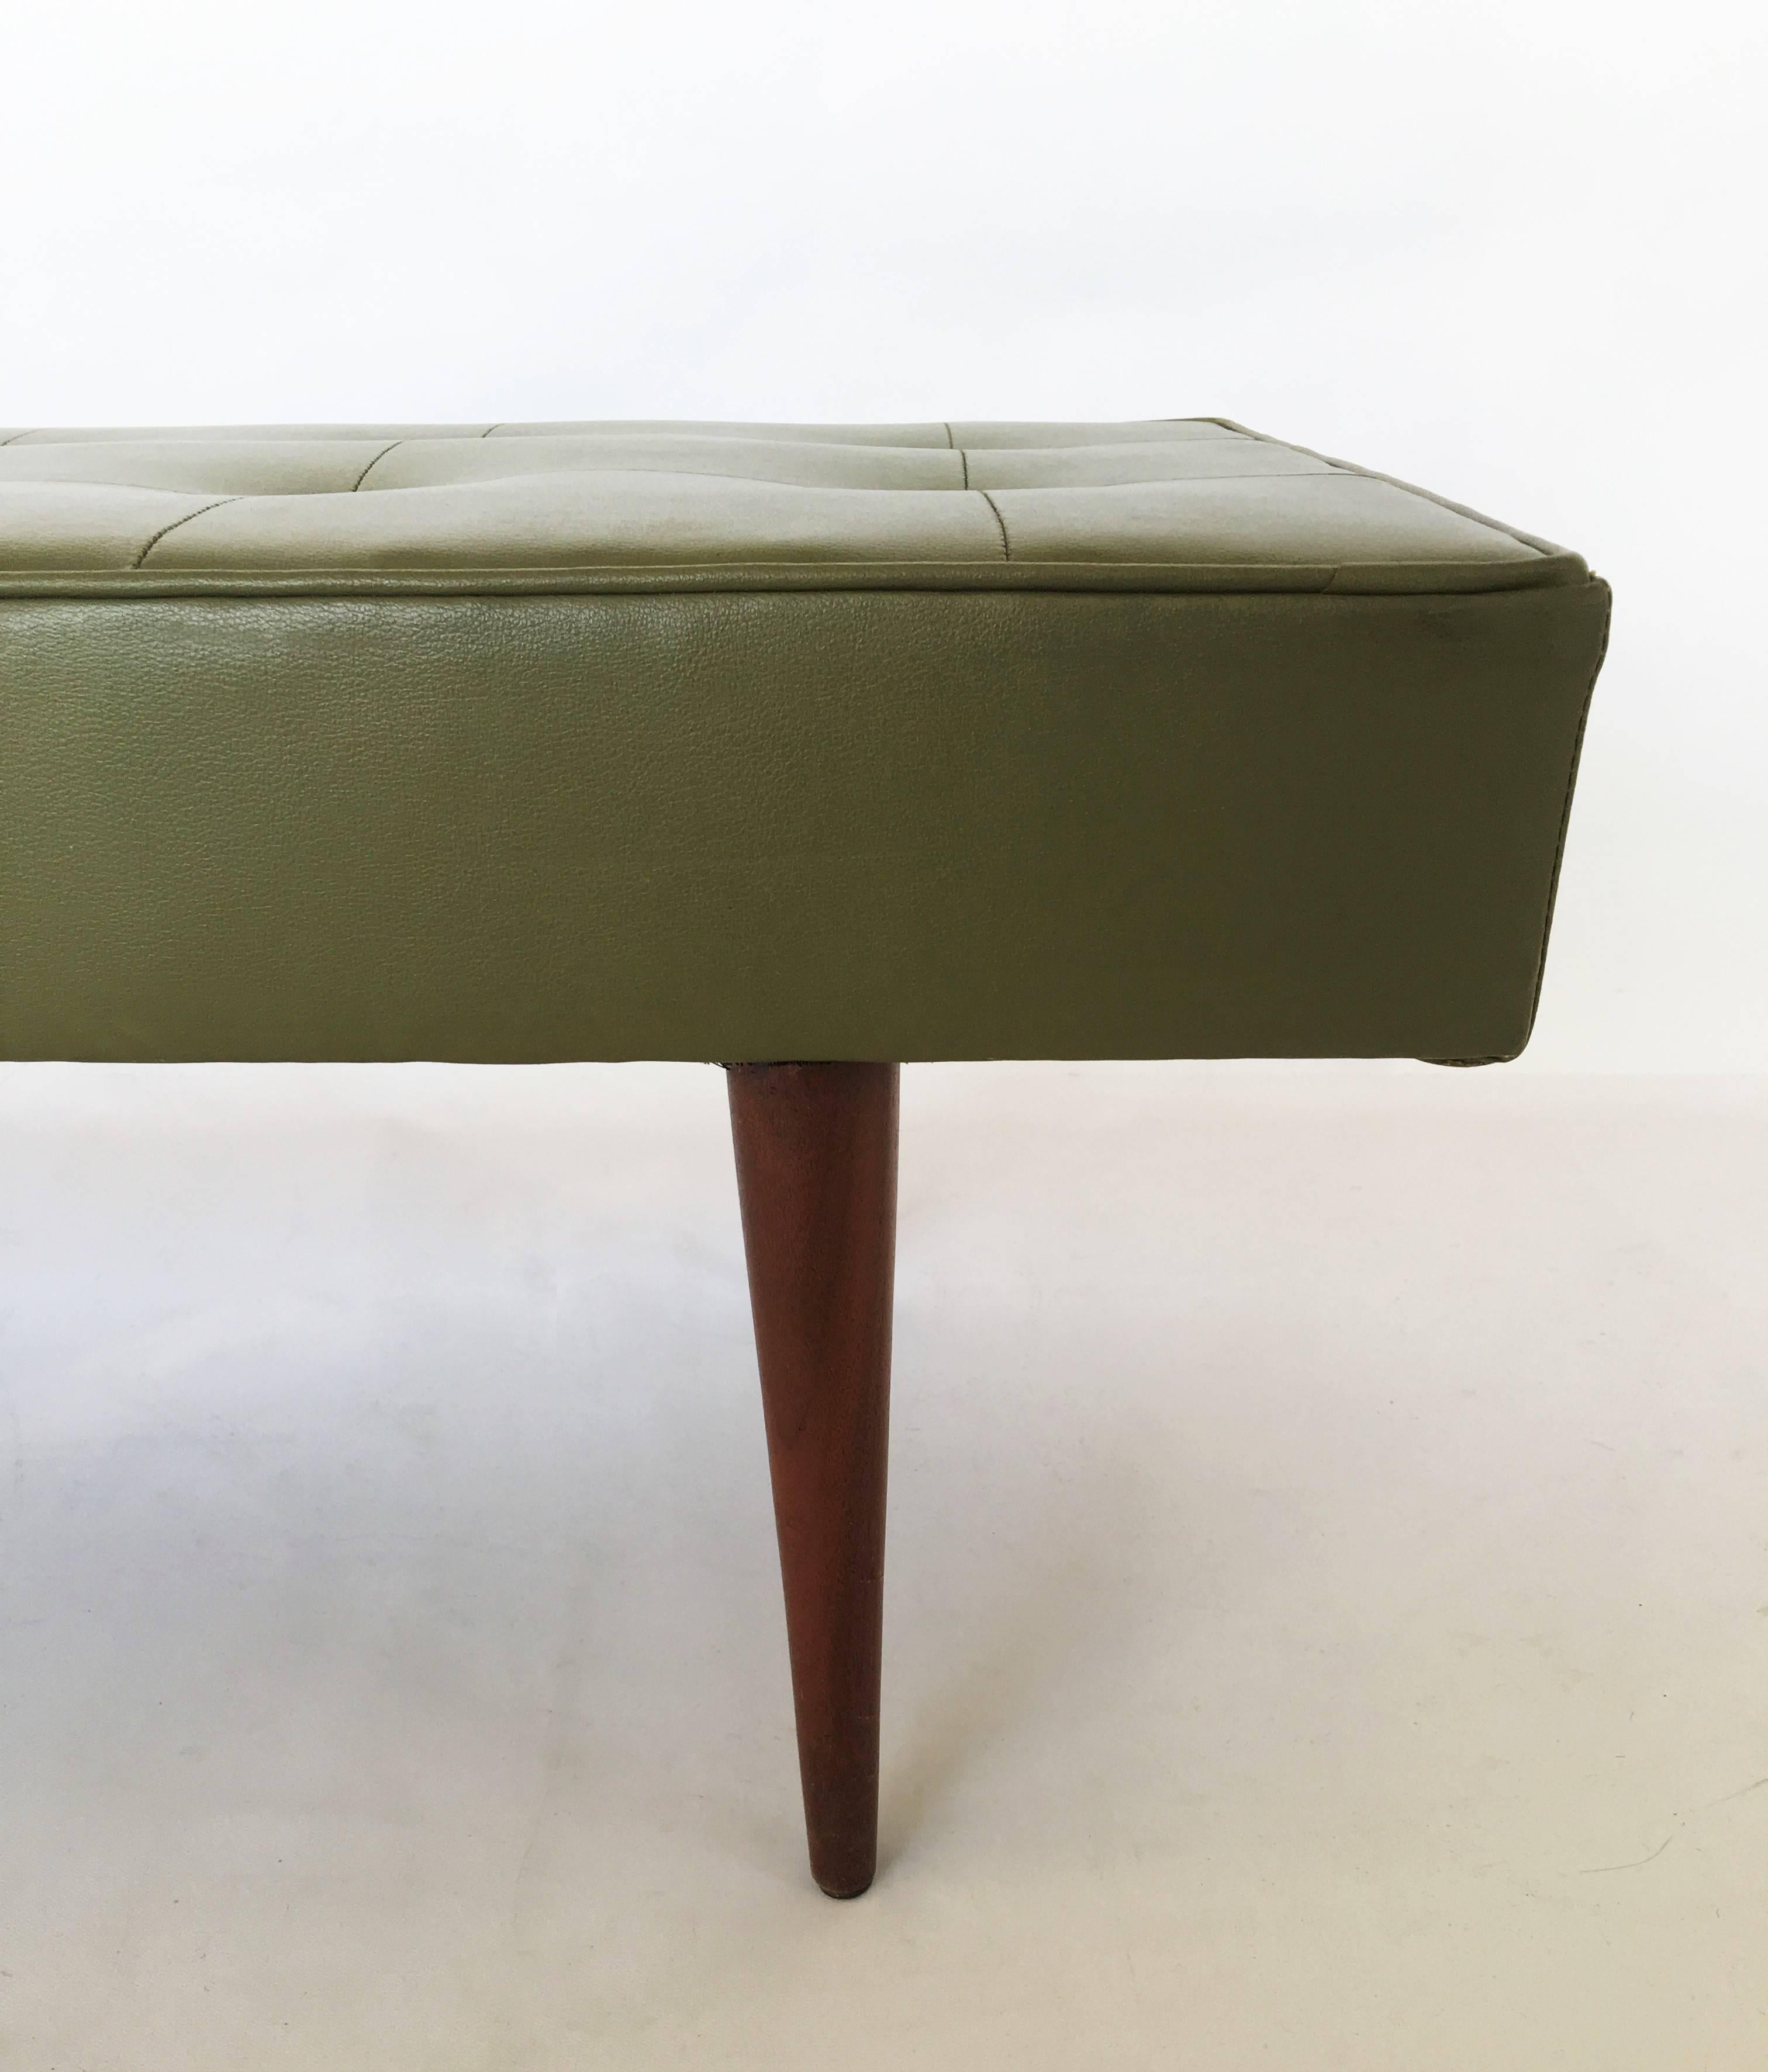 Mid-20th Century Mid-Century Modern Bench by Milo Baughman for Thayer Coggin For Sale